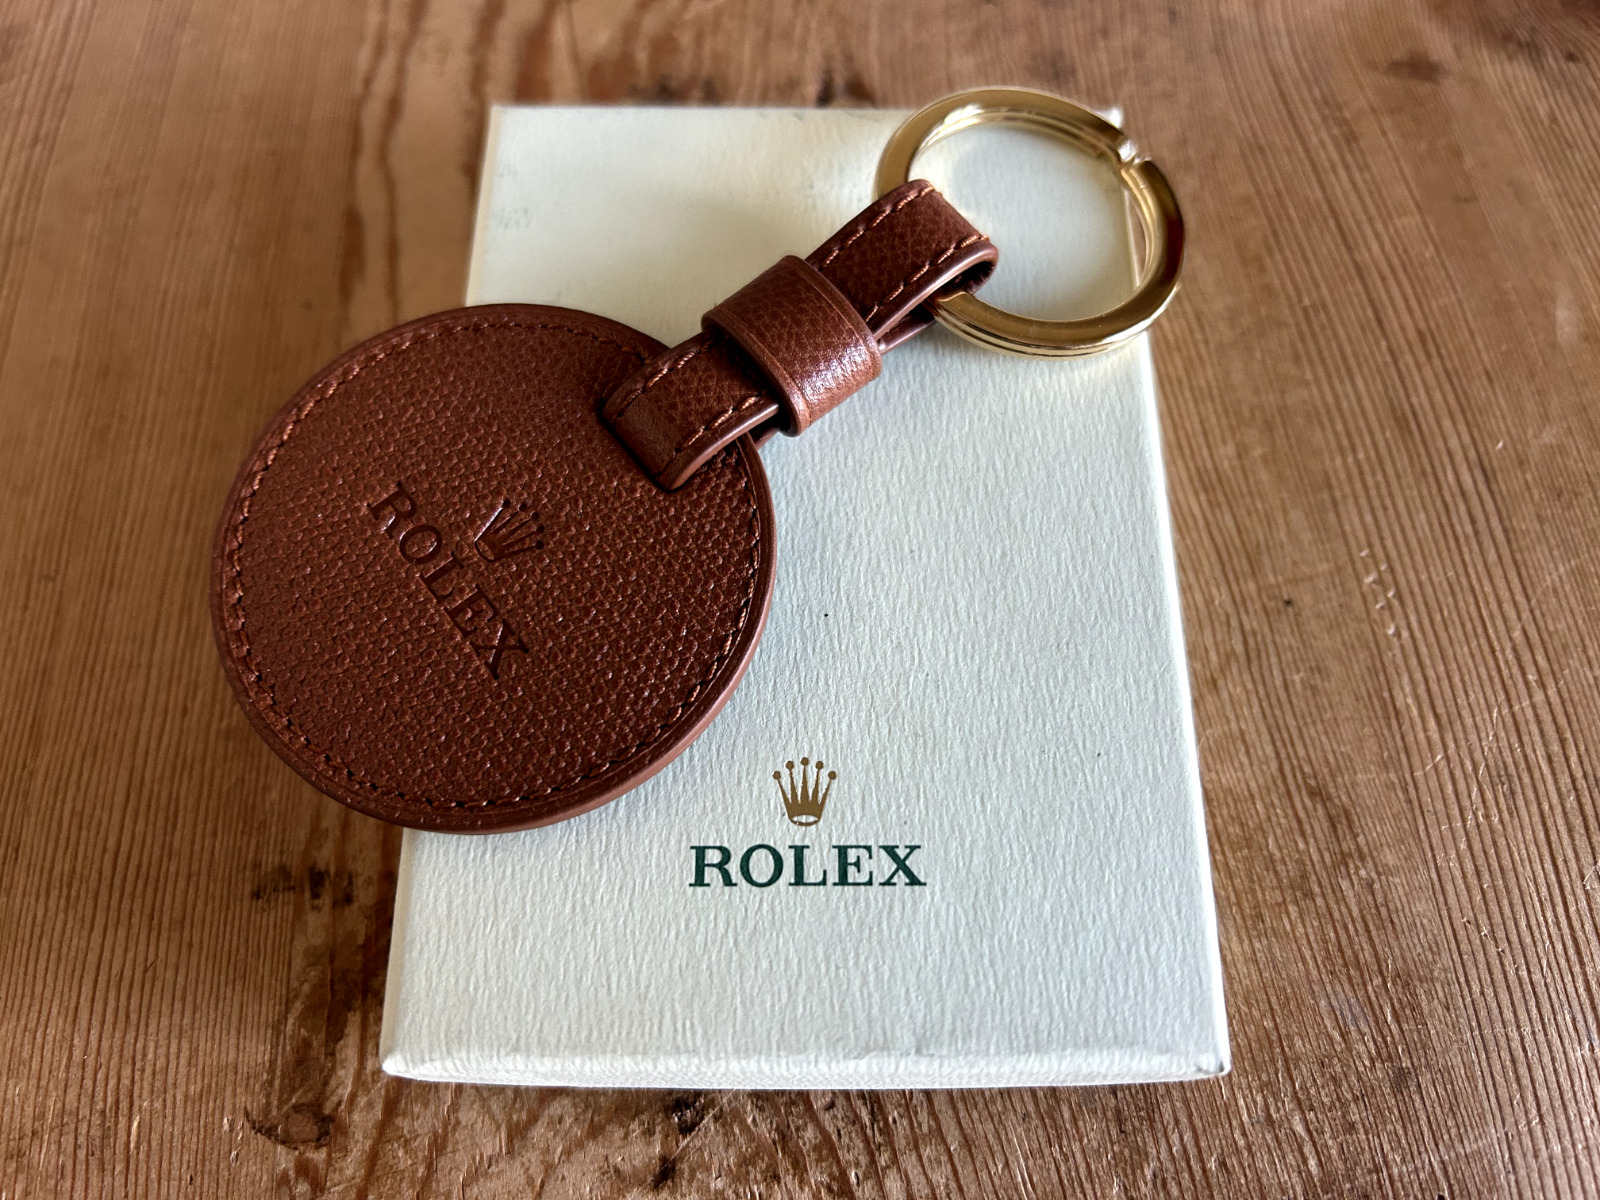 Keychain - Rolex - Key Chain - Brown Leather with Box